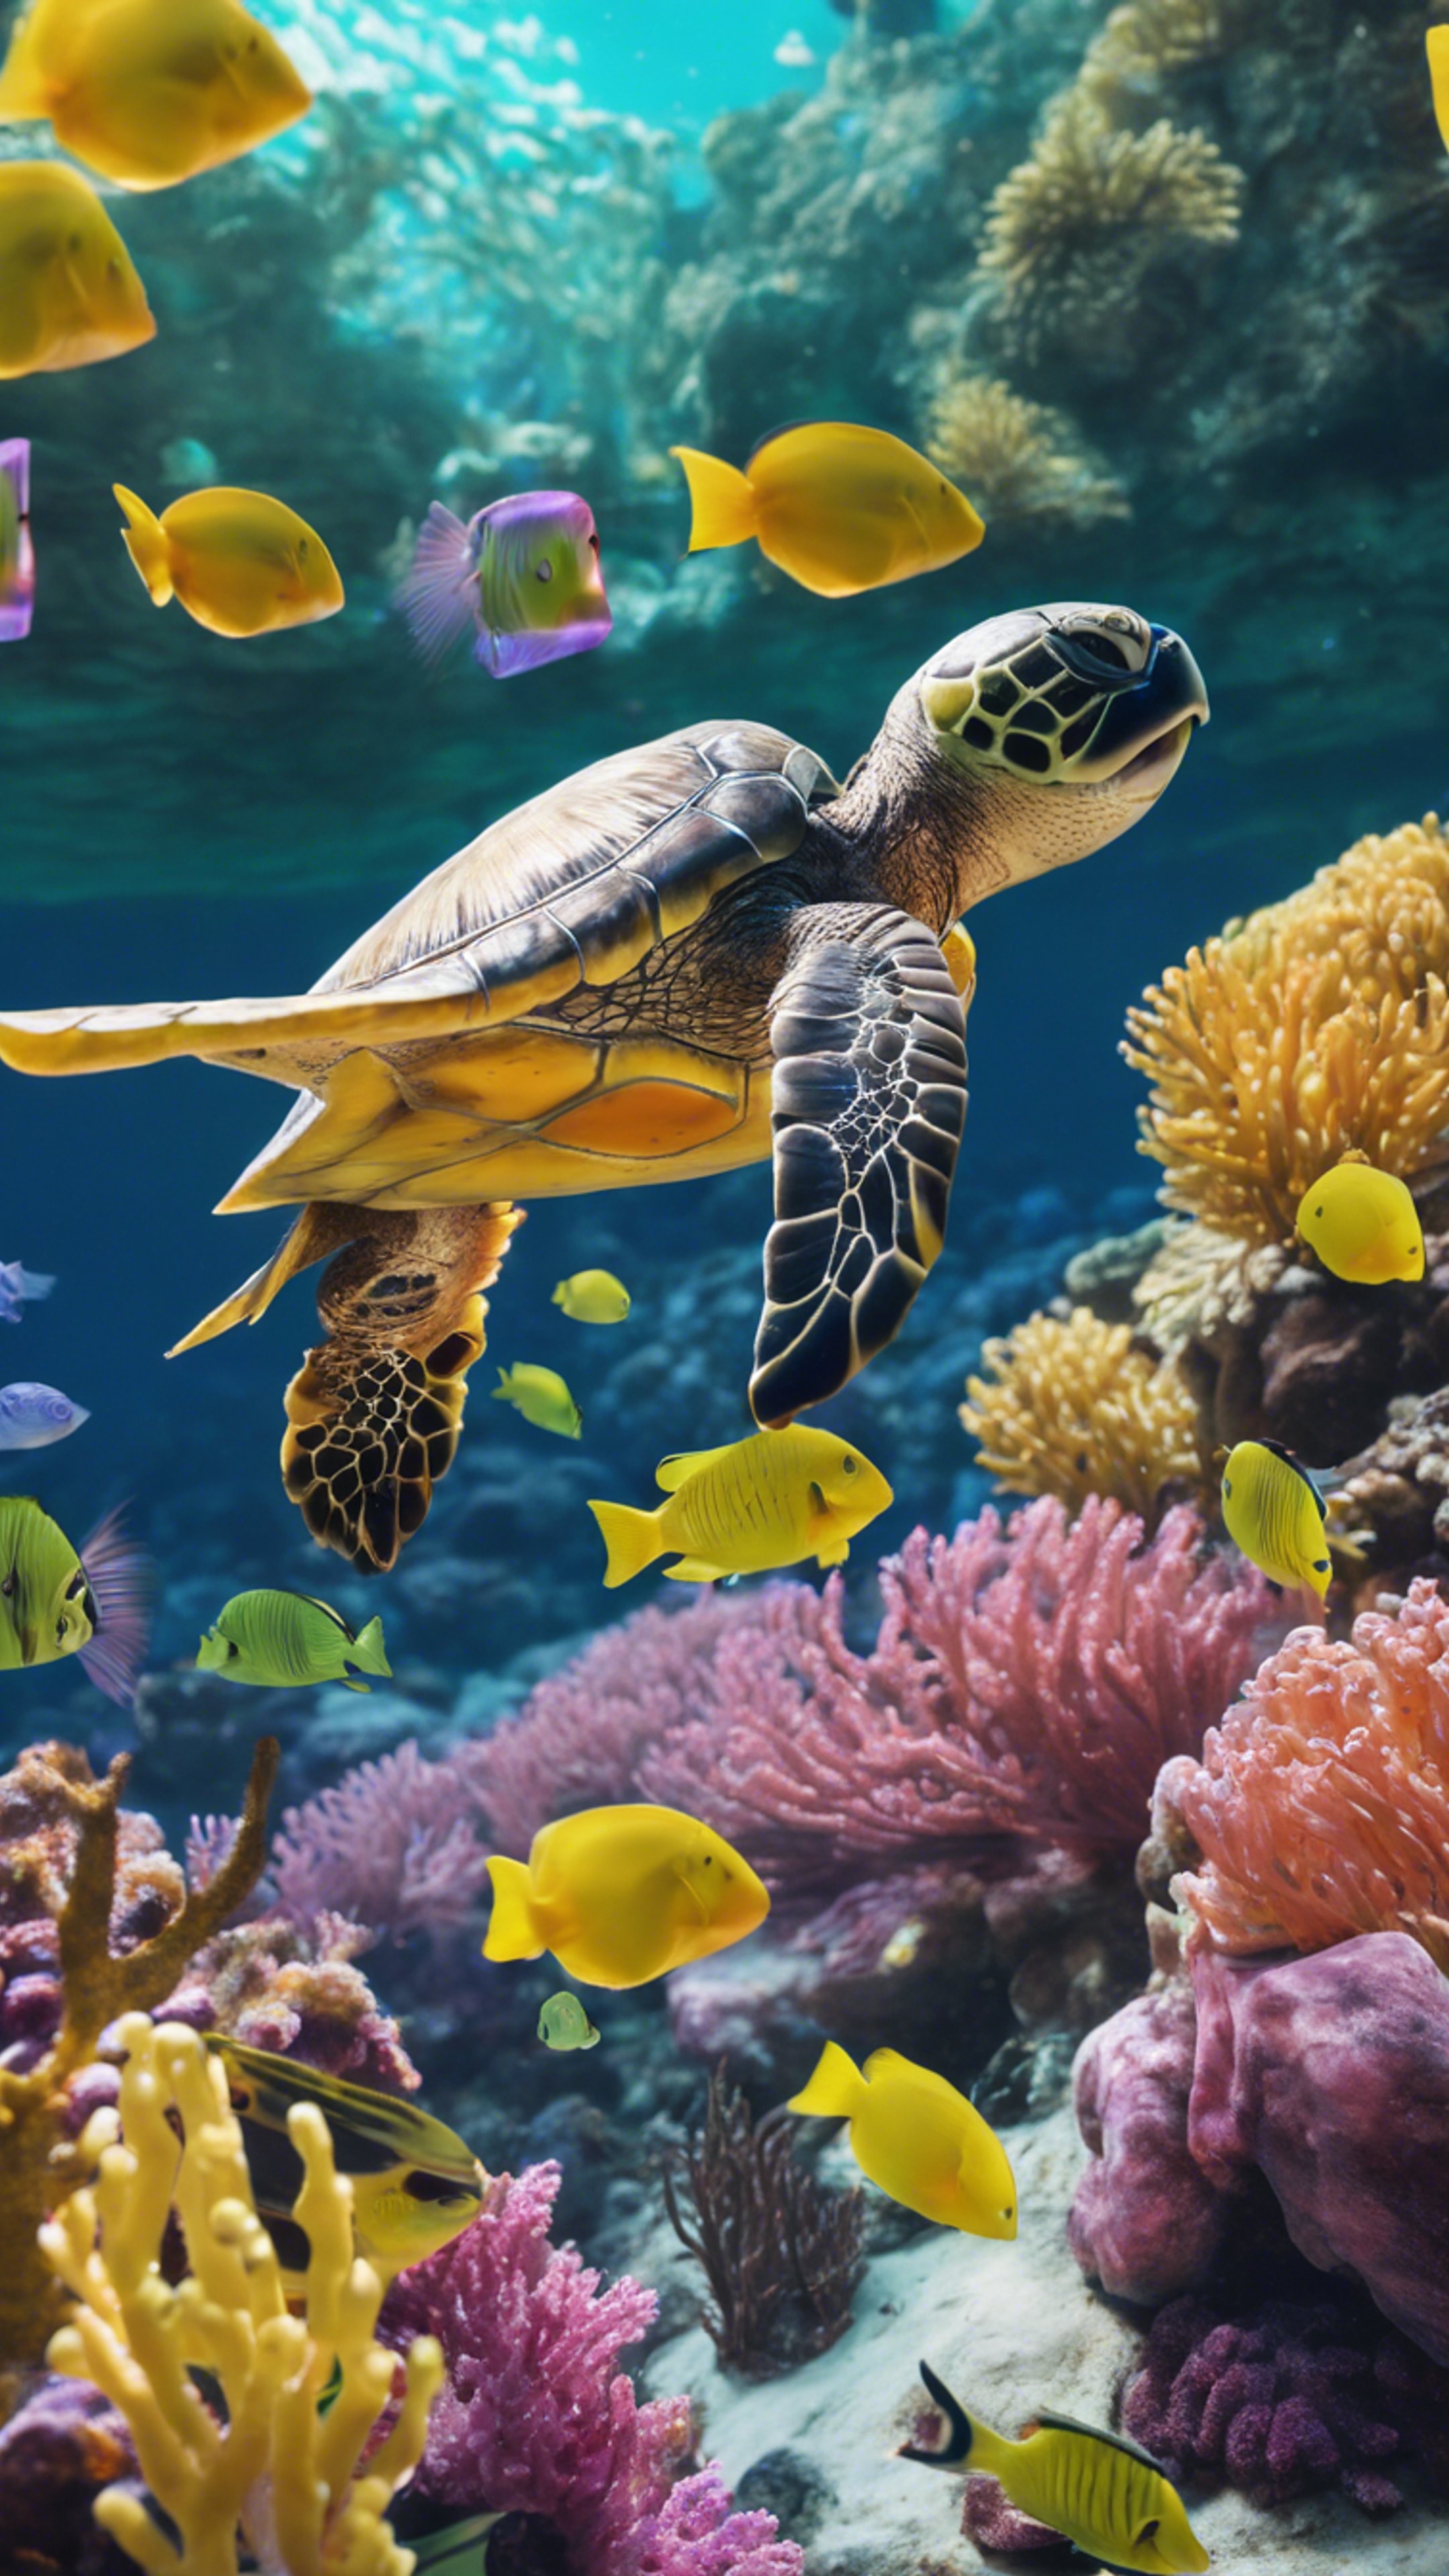 A sea turtle curiously interacting with colorful fishes in a reef. Sfondo[2bbd294c31244e90b849]